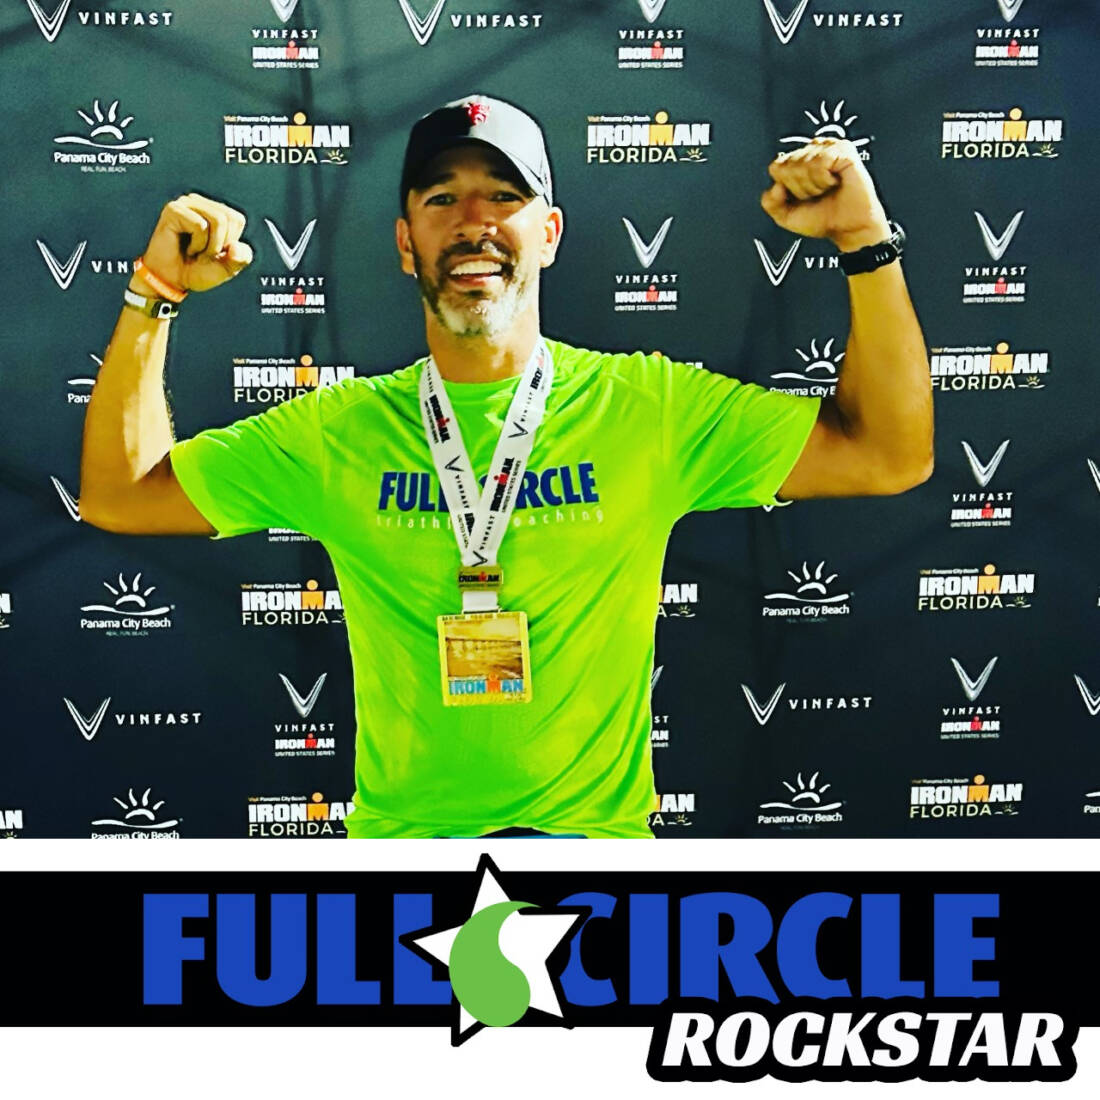 Busy Dad becomes first time Ironman in 12:10 with only 14 weeks of training; Rockstar Triathlete Carlos Guadamuz